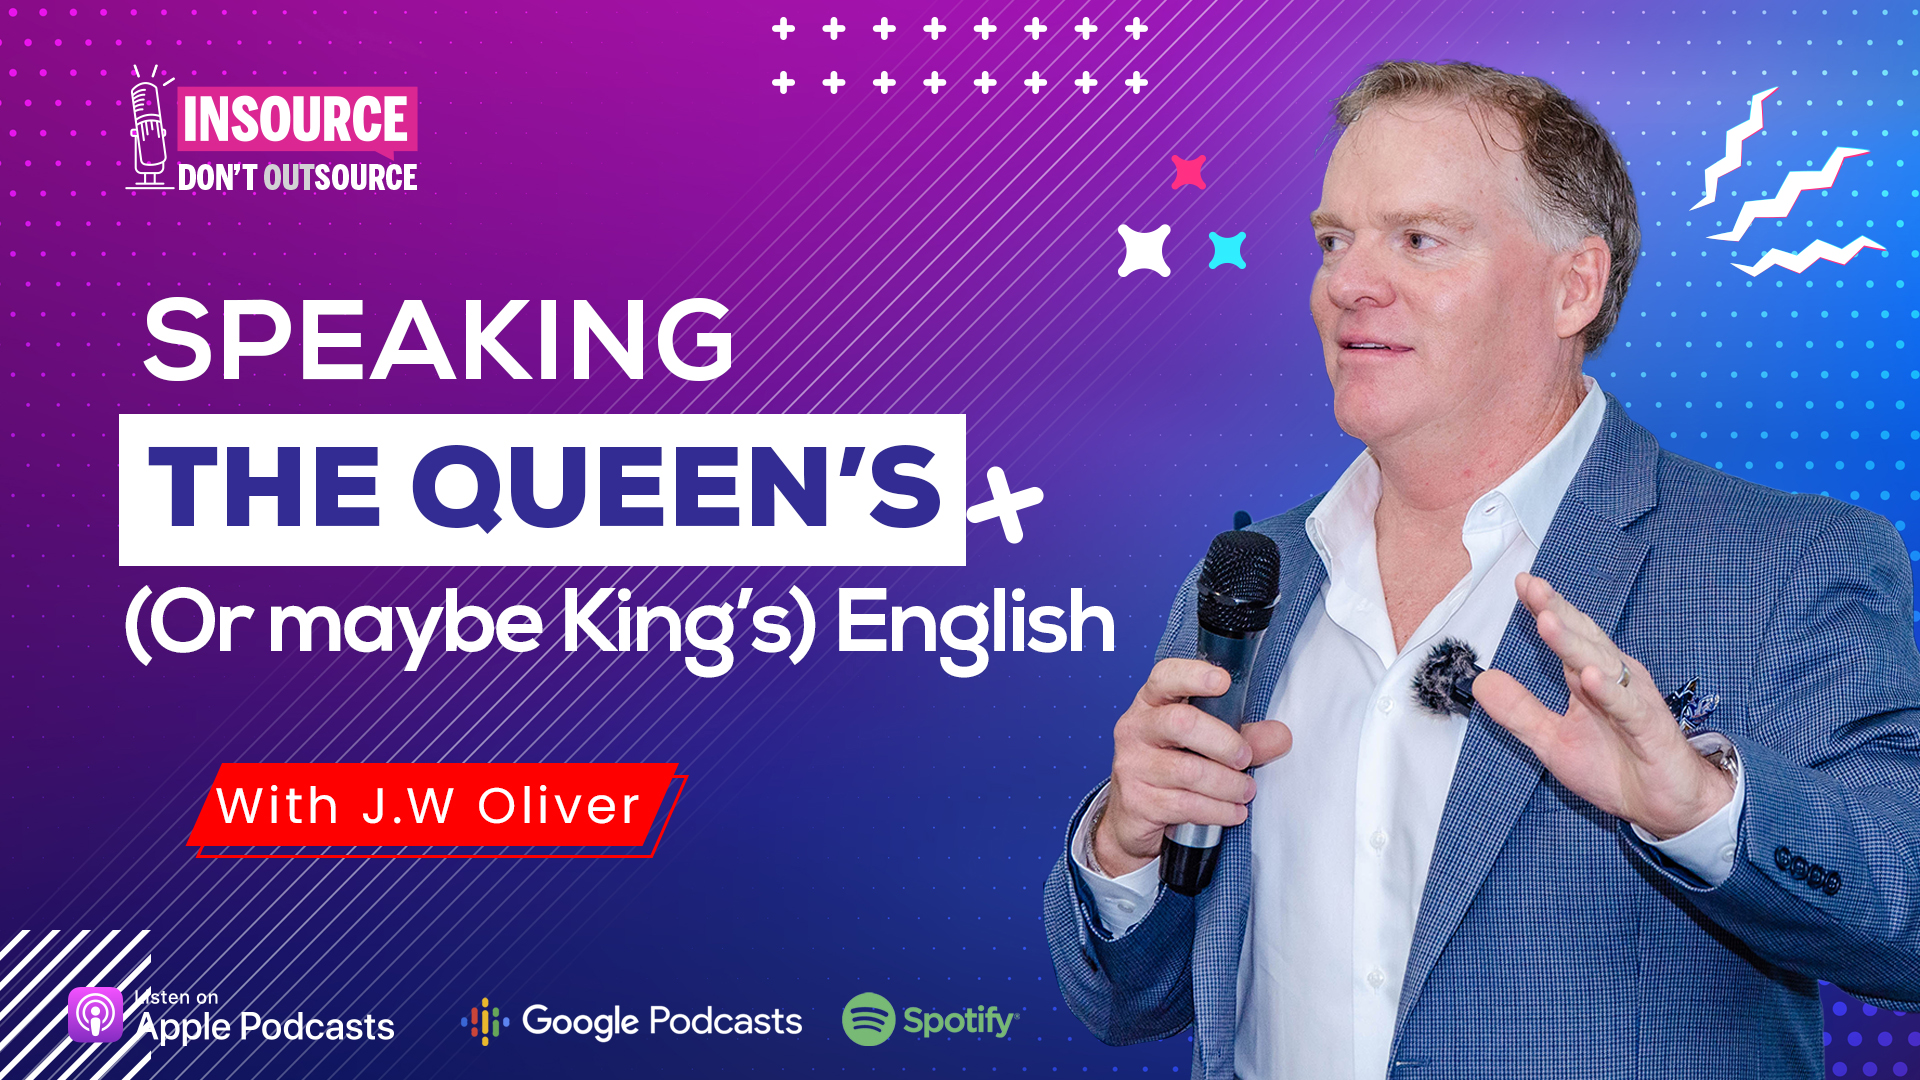 Episode 22 | Speaking the Queen’s or maybe King's English